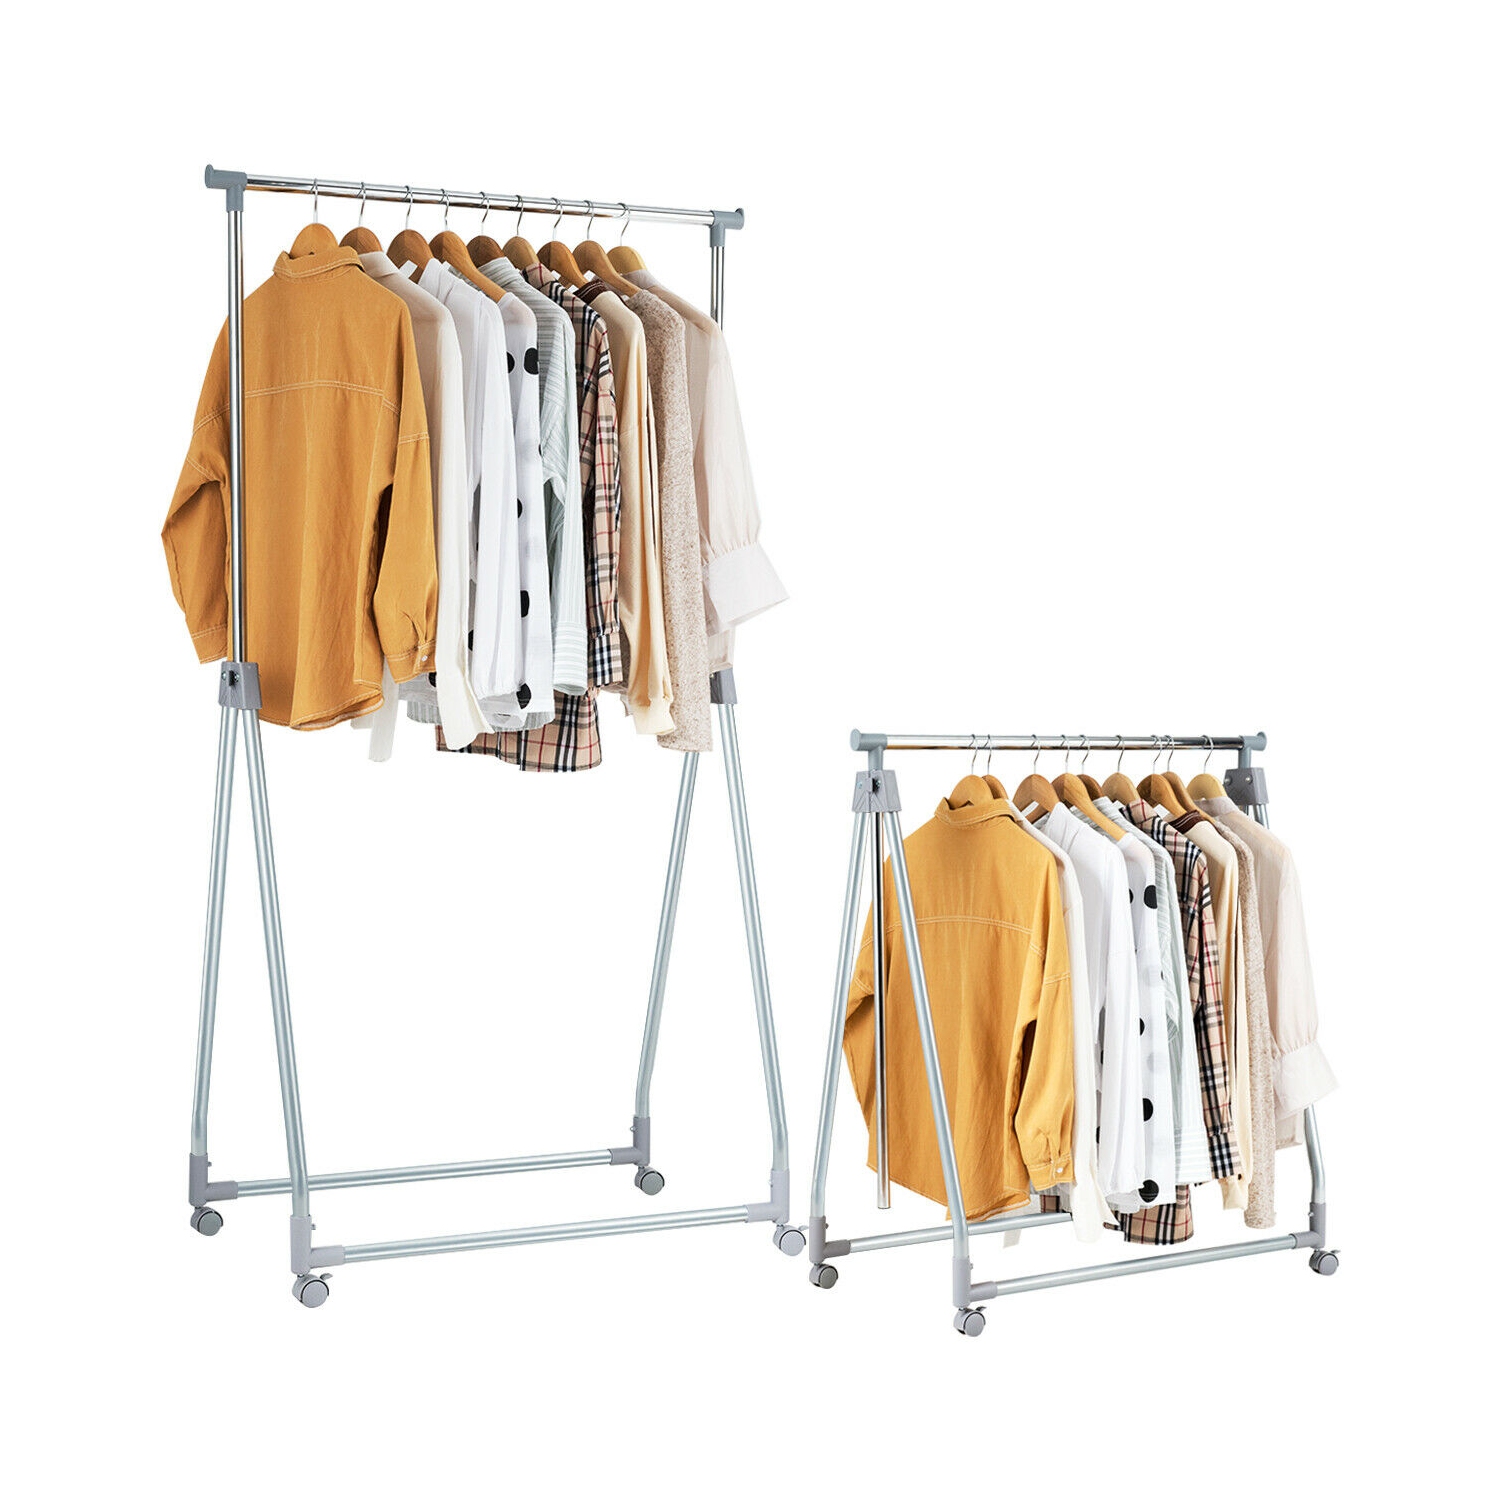 Gymax Extendable Clothing Garment Rack Heavy Duty Foldable Clothes Rack W/Hanging Rod